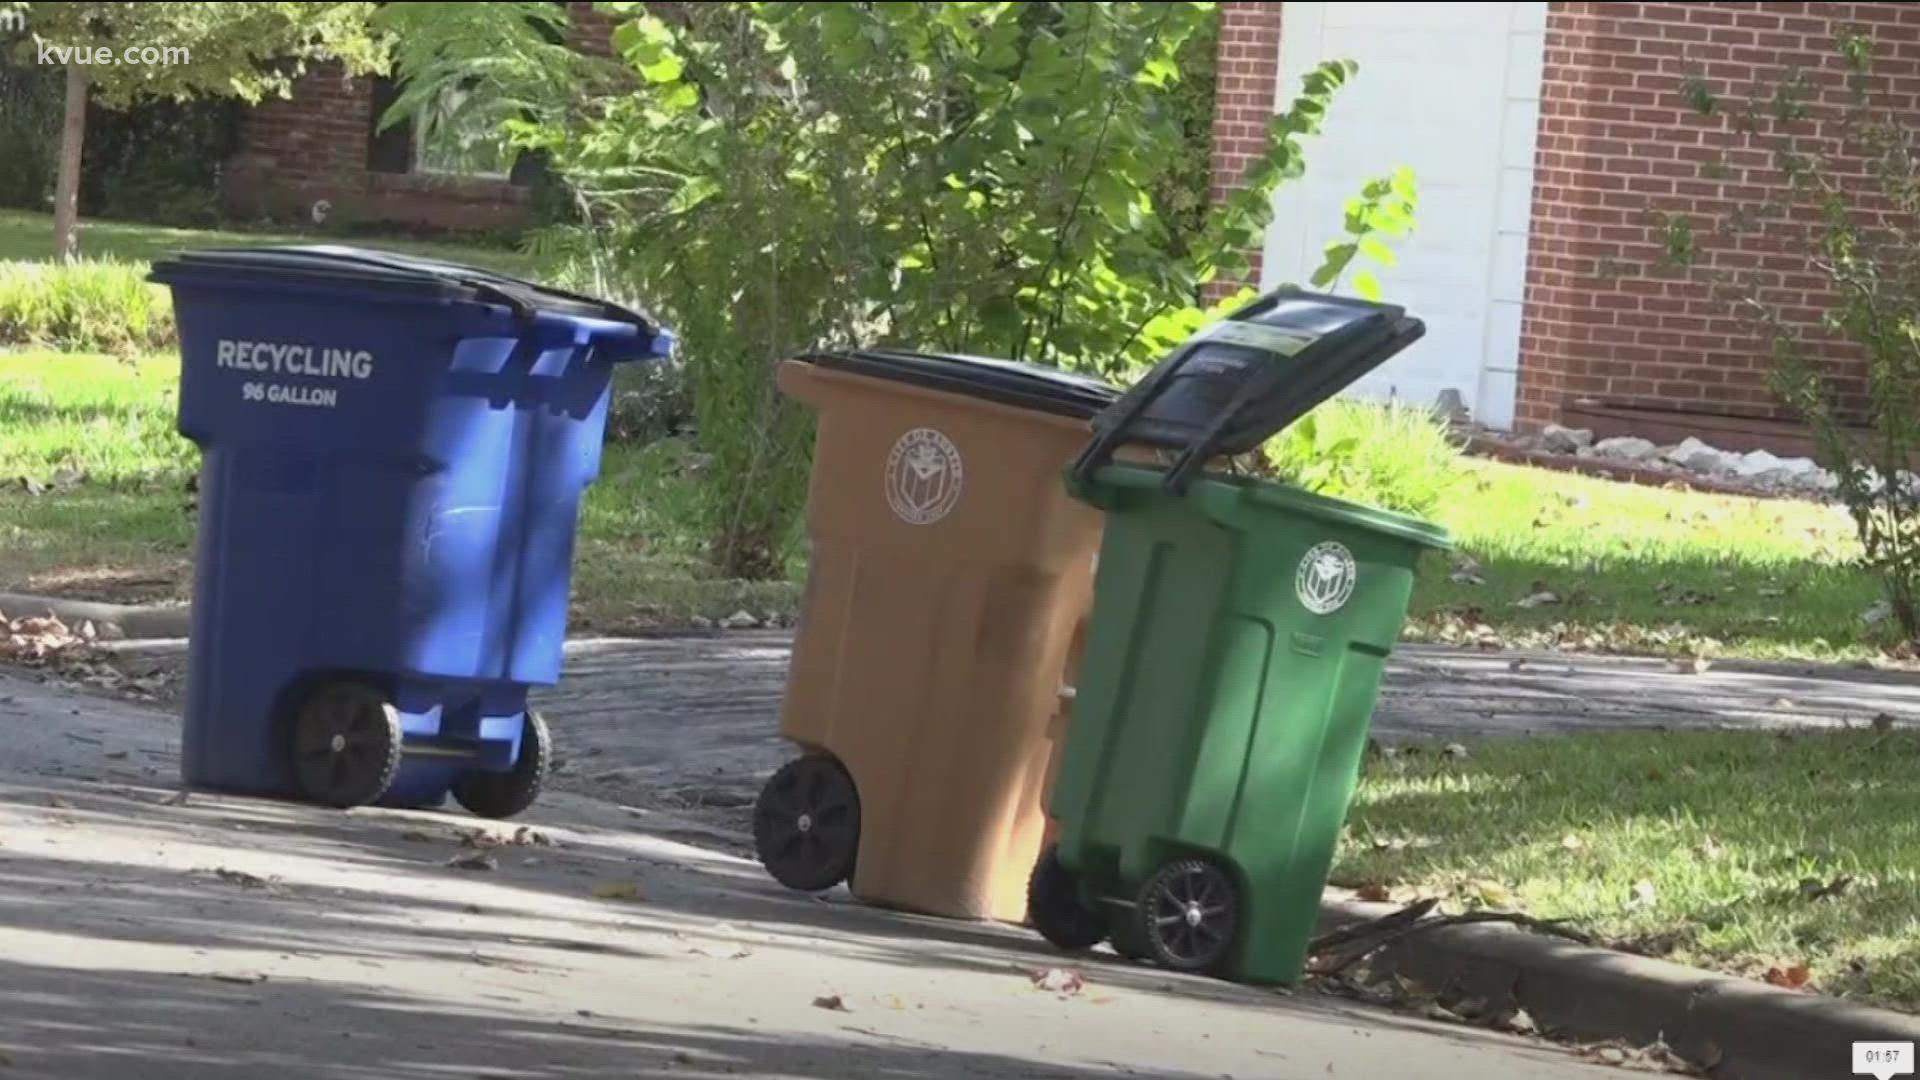 The City of Austin is struggling to find people to drive garbage trucks. KVUE's Conner Board explains how the shortage is impacting operations.